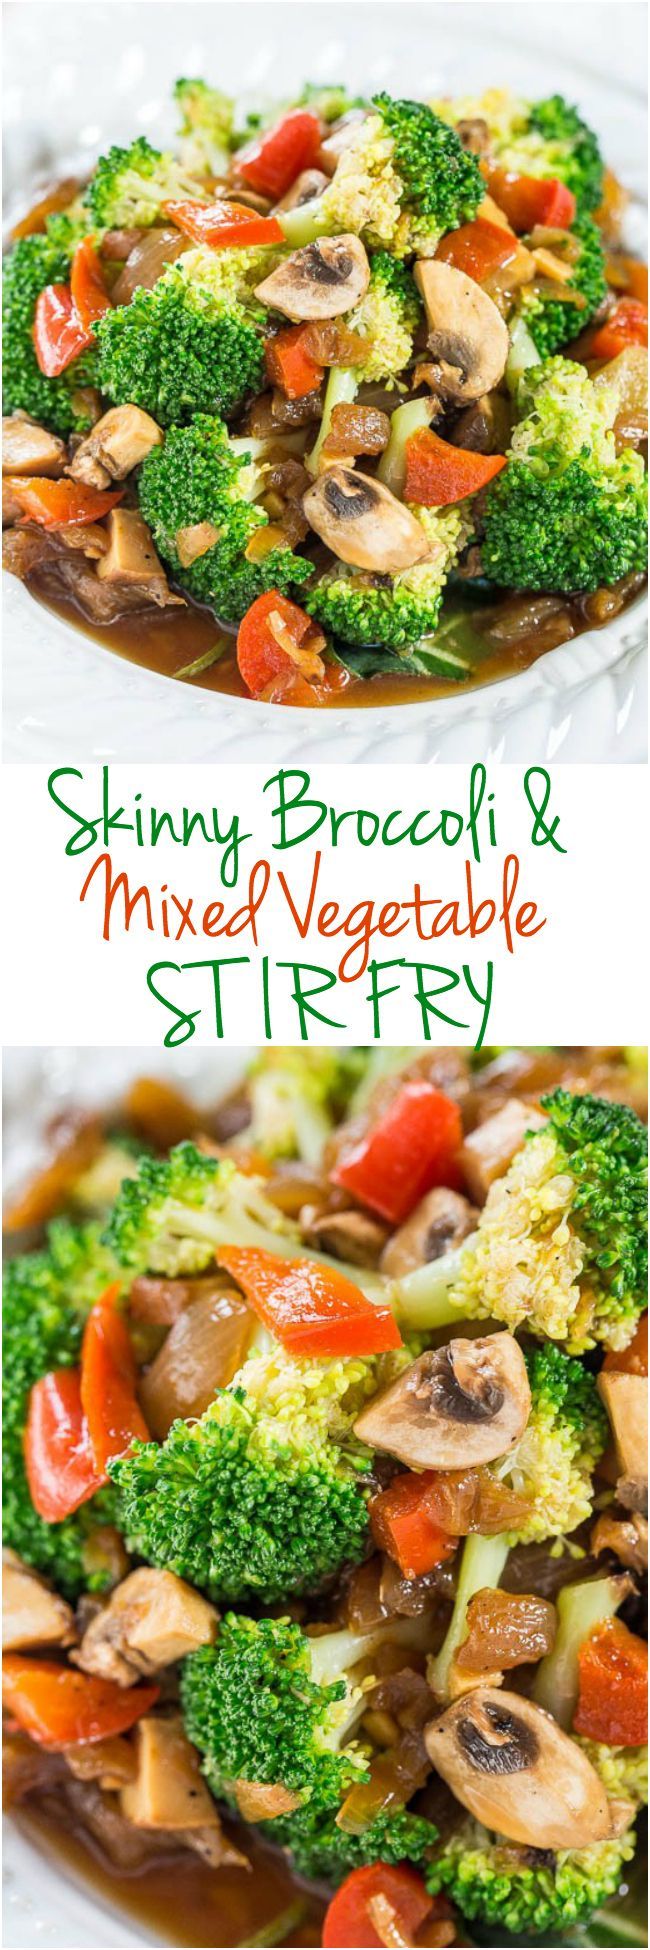 The 11 Best Stir Fry Recipes – Skinny Broccoli and Mixed Vegetable Stir Fry